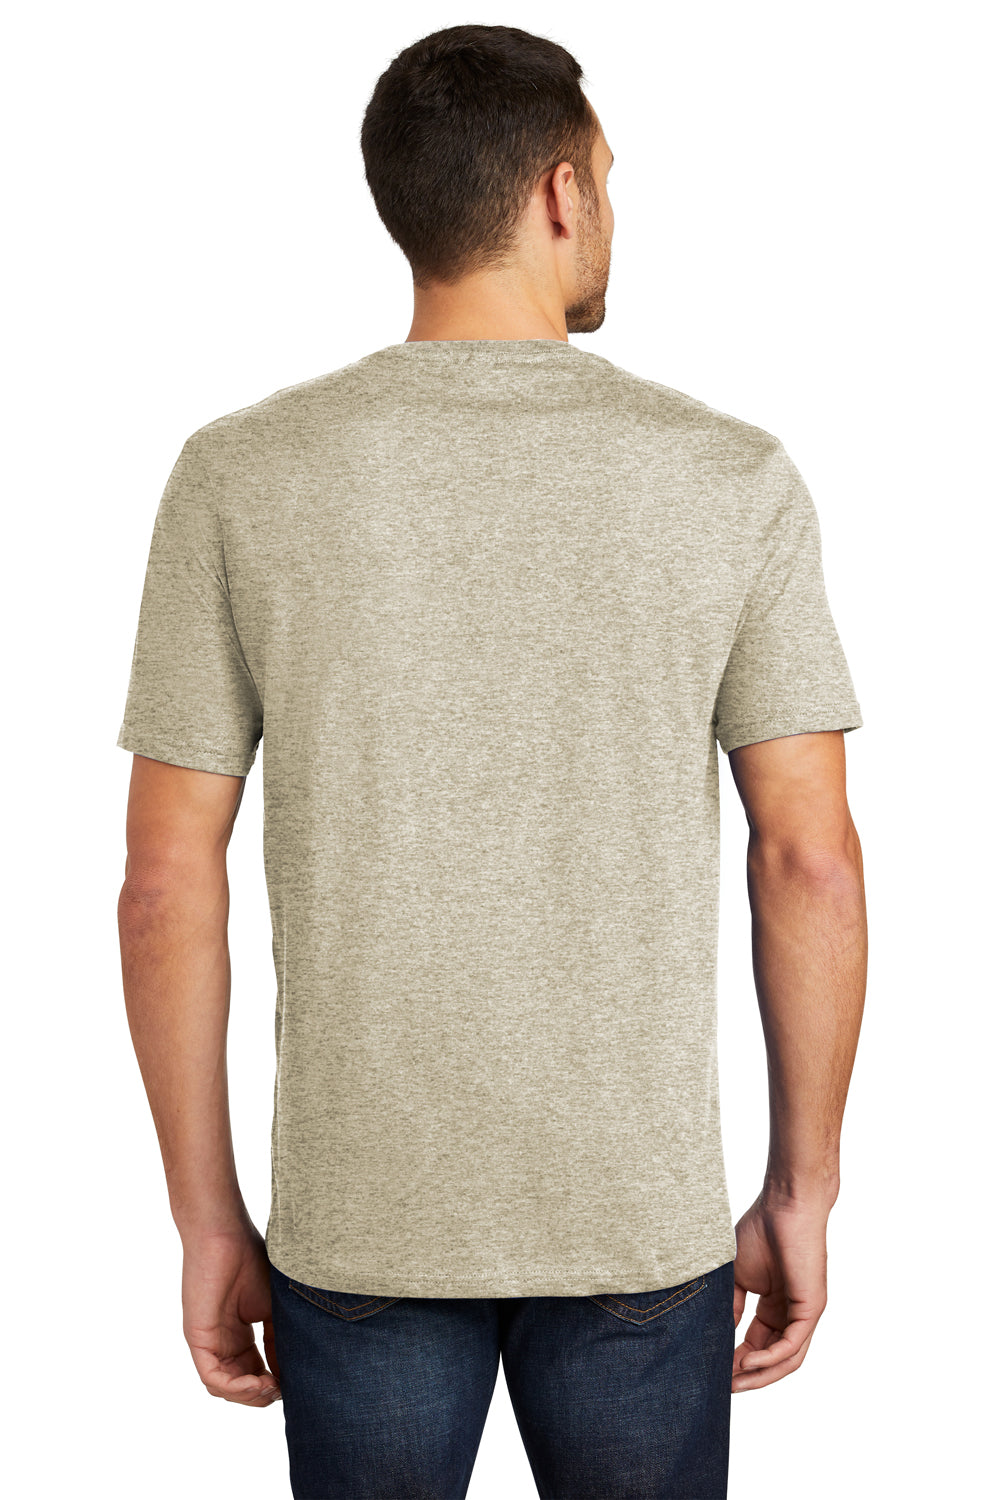 District DT104 Mens Perfect Weight Short Sleeve Crewneck T-Shirt Heather Latte Brown Back